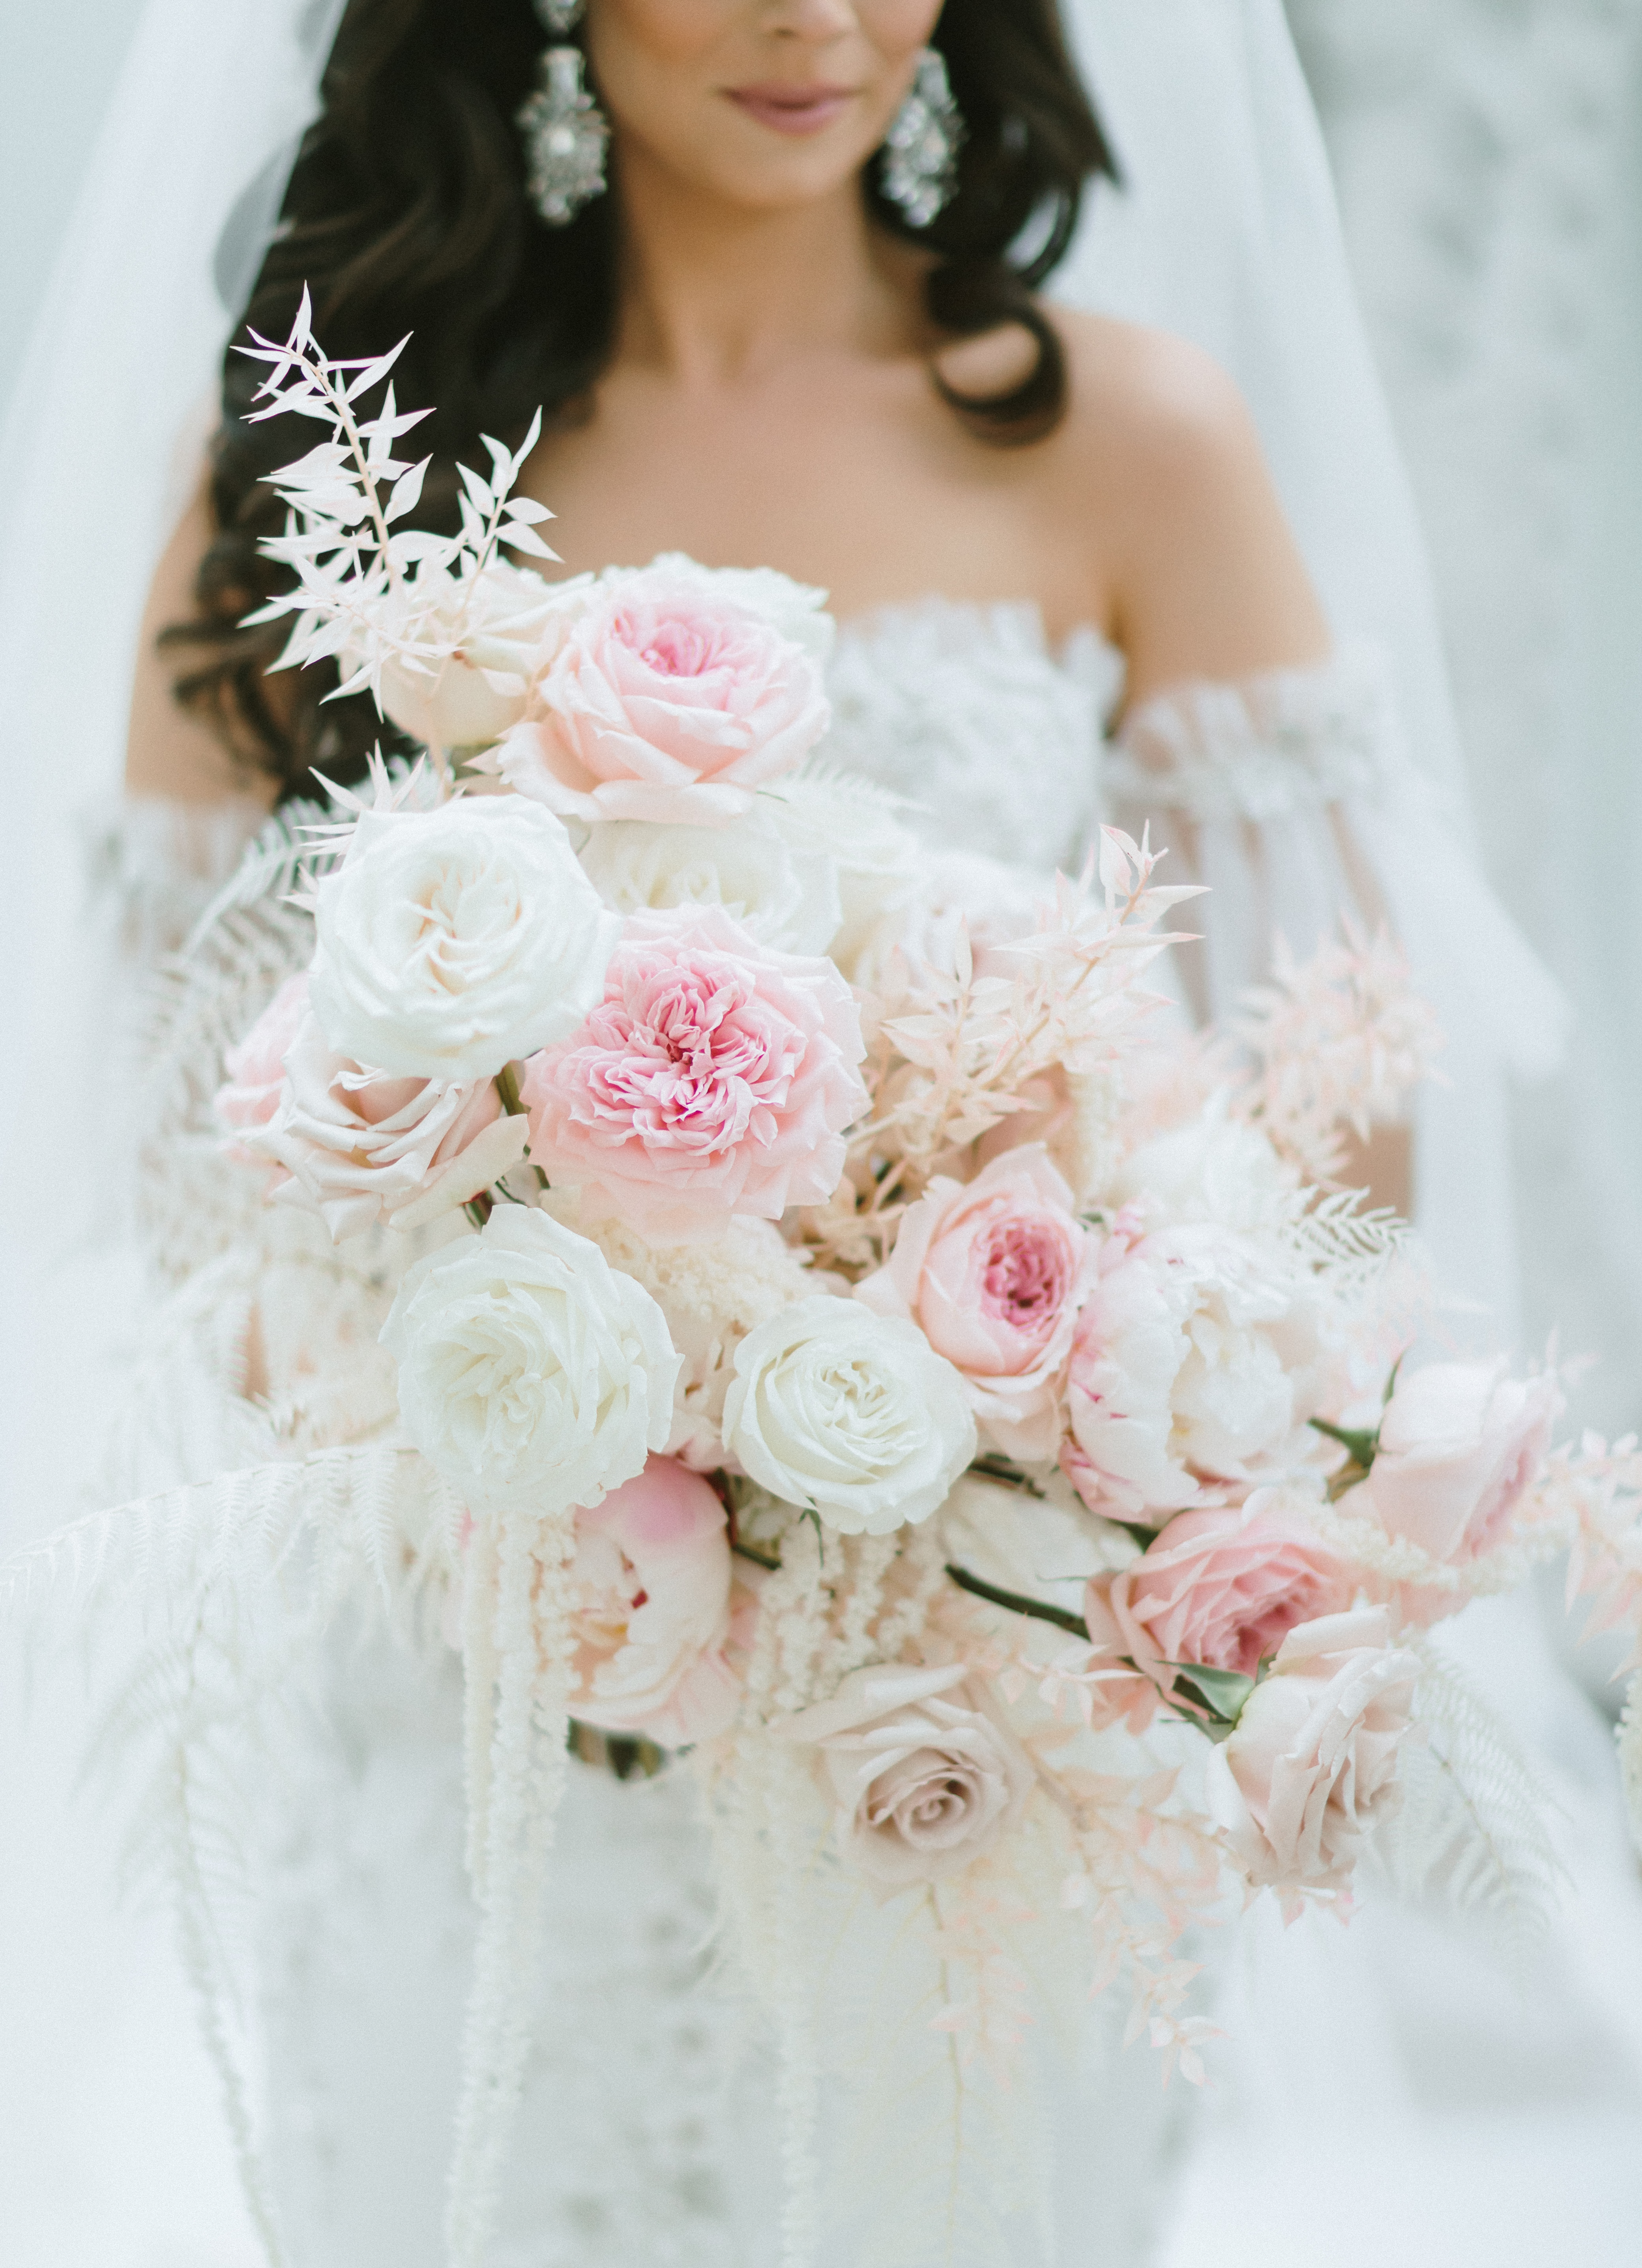 A bride holds her bridal bouquet with white a blush pink flowers for her wedding in Montgomery, TX.